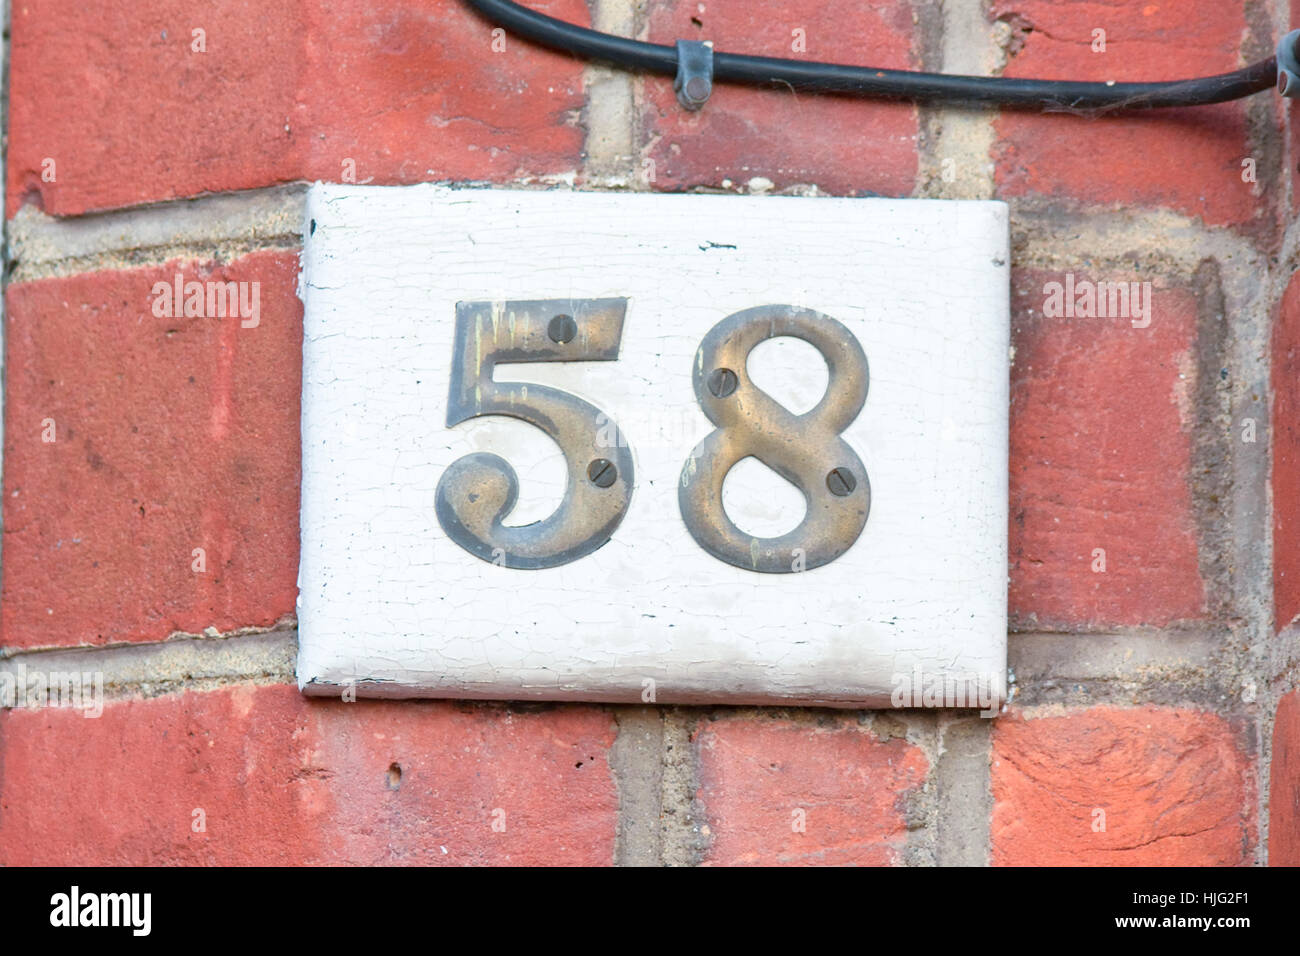 House number 58 sign - brass numbers on wooden block Stock Photo